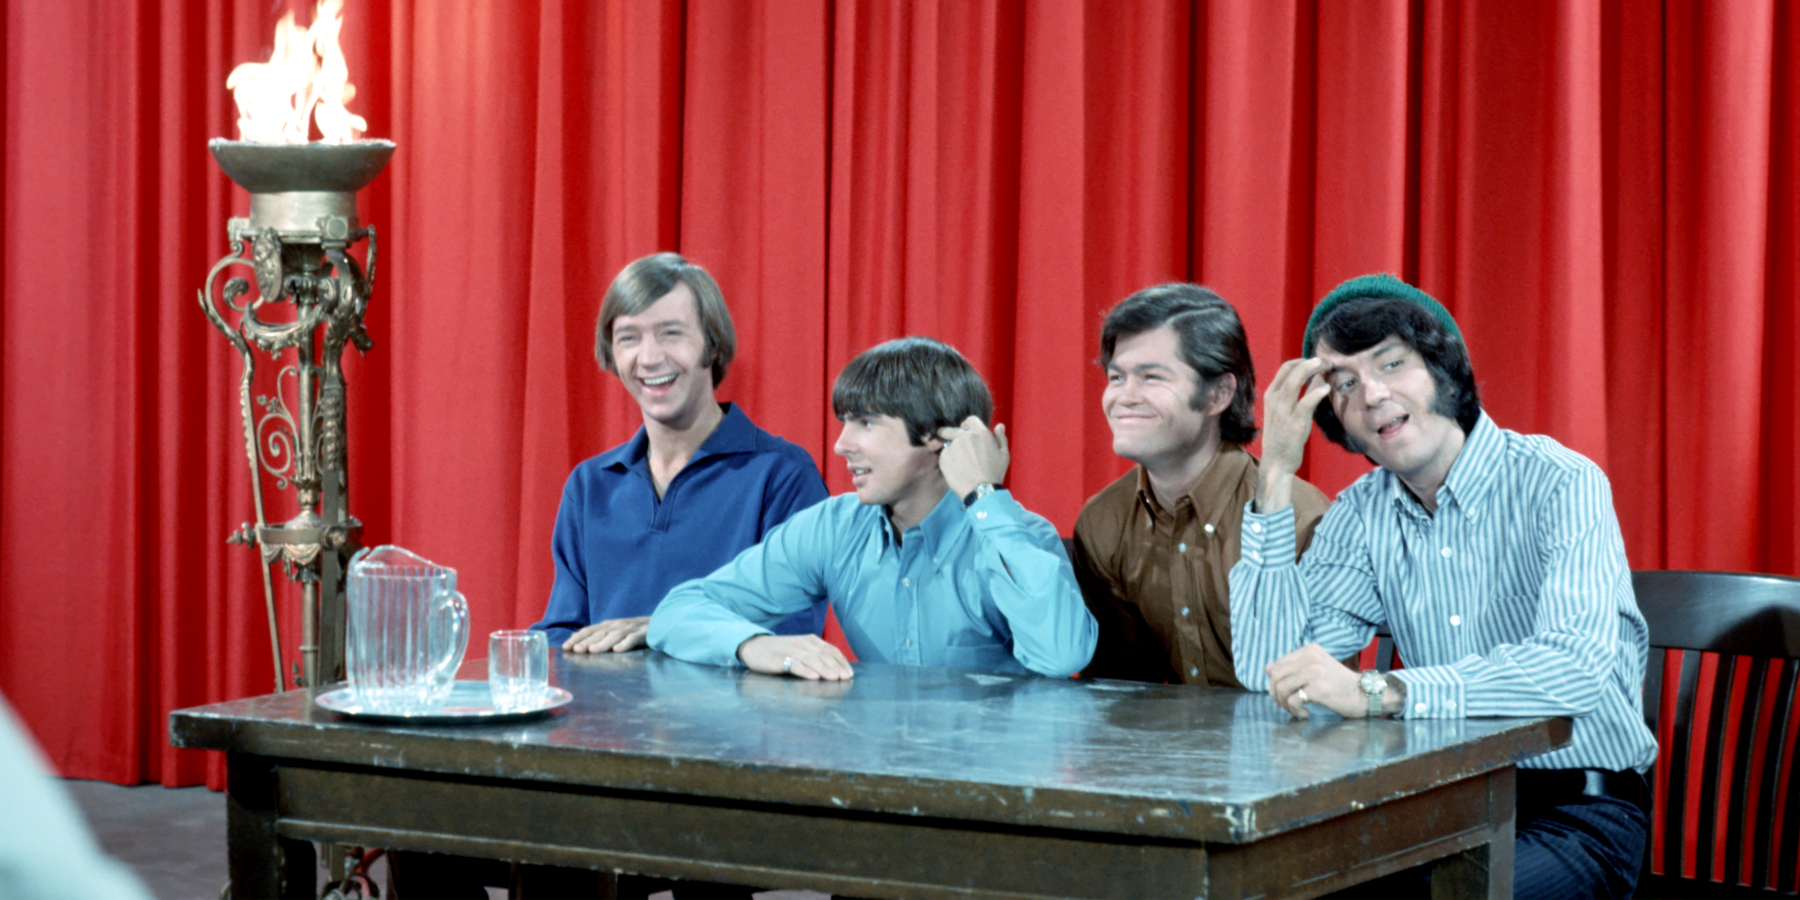 Peter Tork, Davy Jones, Micky Dolenz, and Mike Nesmith on the set of 'The Monkees' television show in the late 1960s.